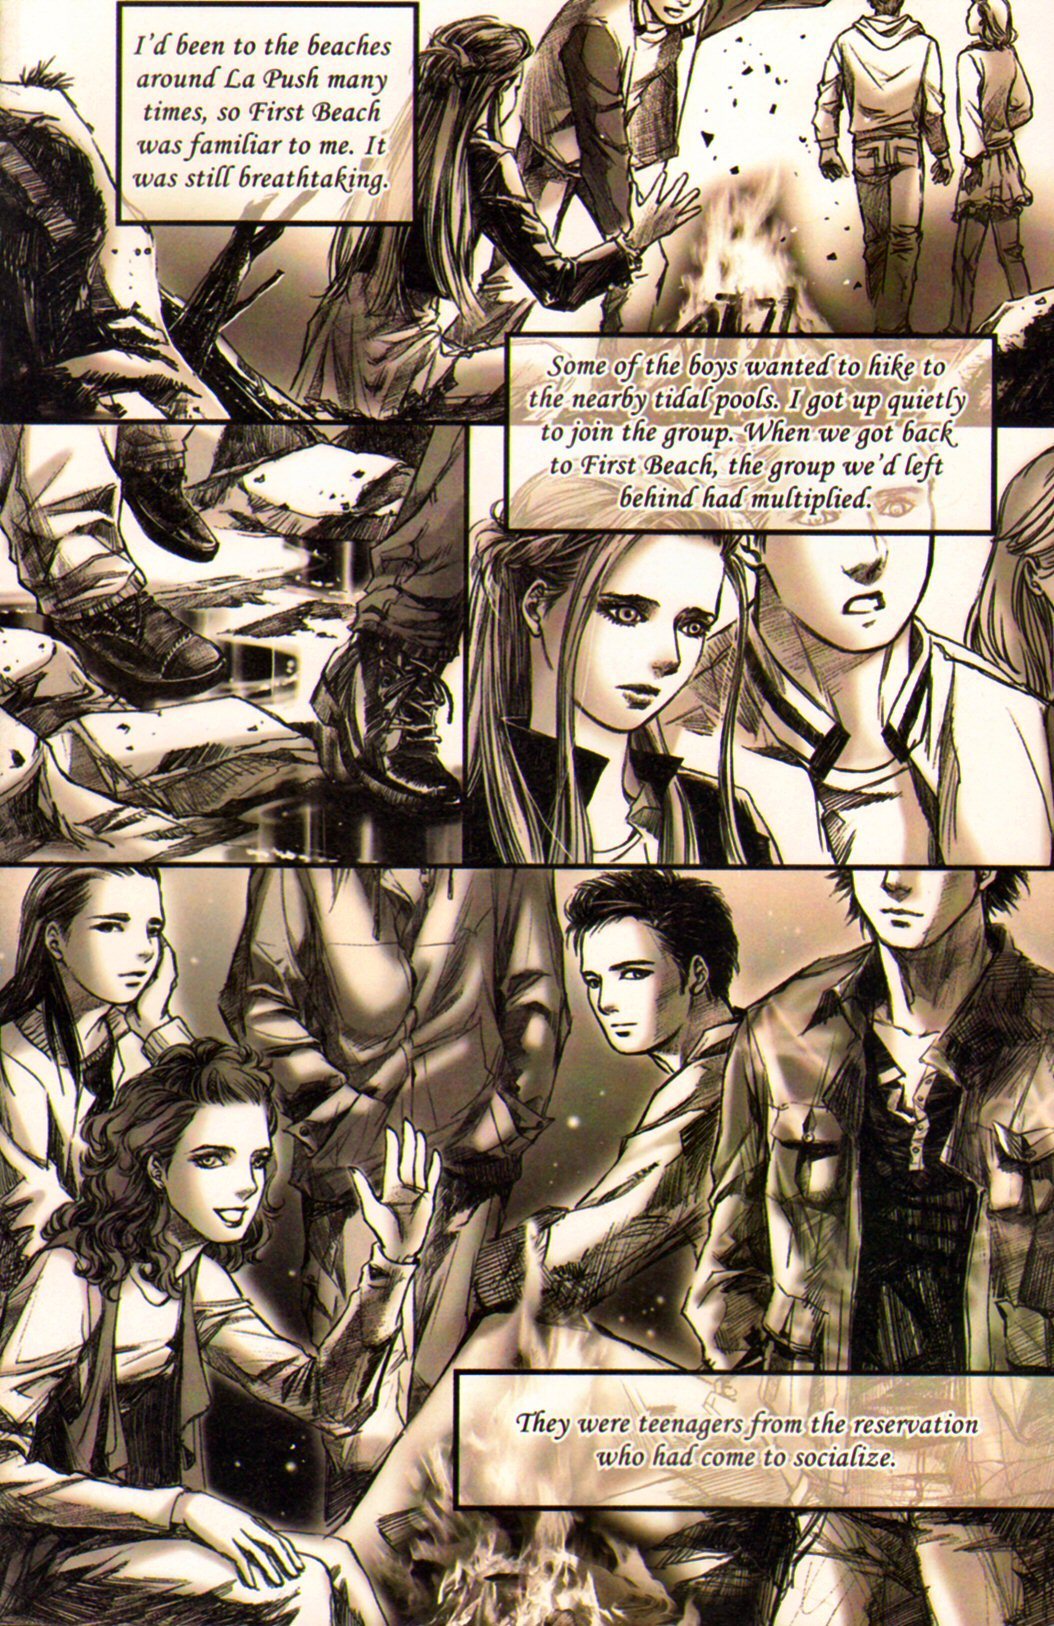 Photo of Graphic novel (21) for fans of Twilight: The Graphic Novel. 